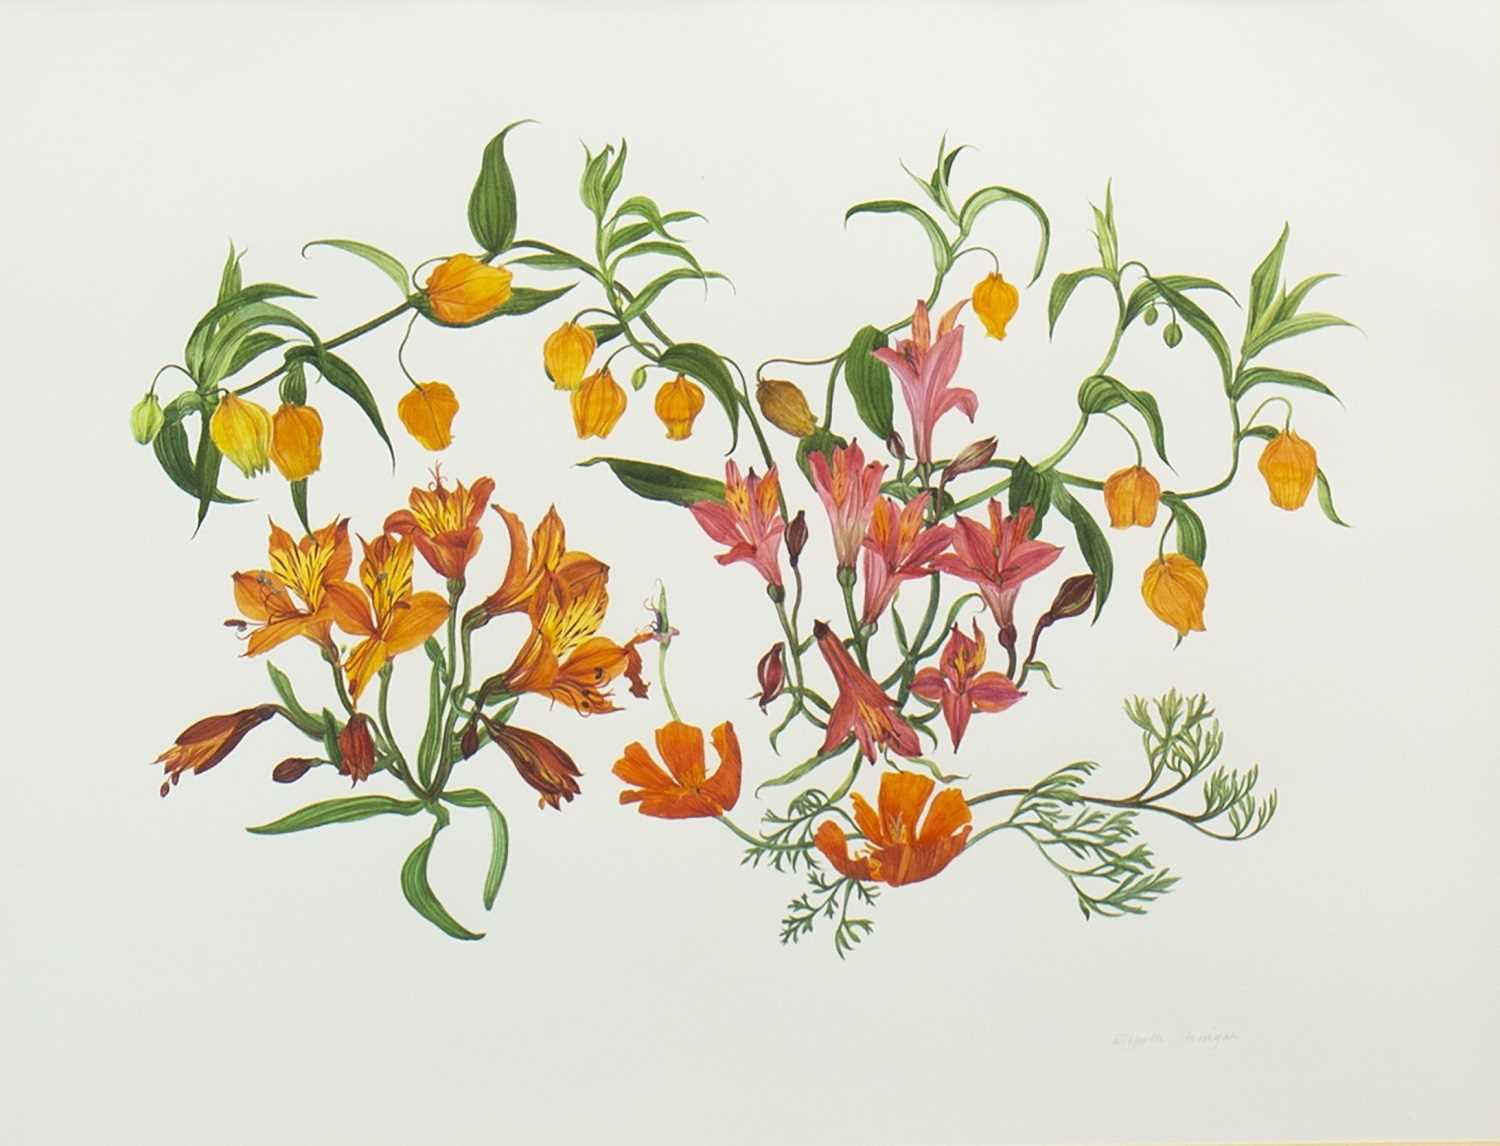 Lot 568 - HOT SUMMER, A WATERCOLOUR BY ELSPETH HARRIGAN